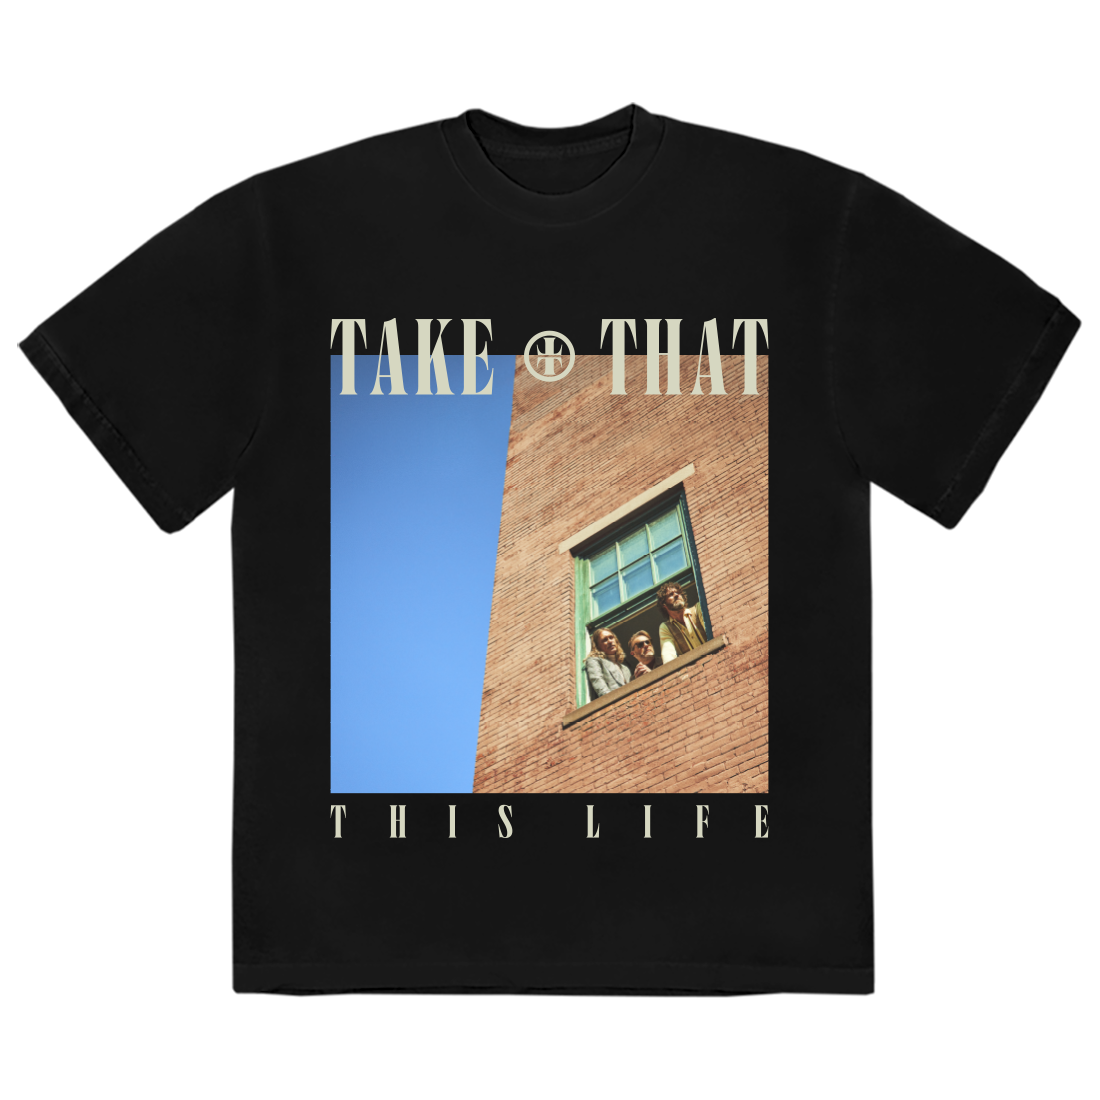 Limited Edition Cream LP, CD and Black TT Photo Tee